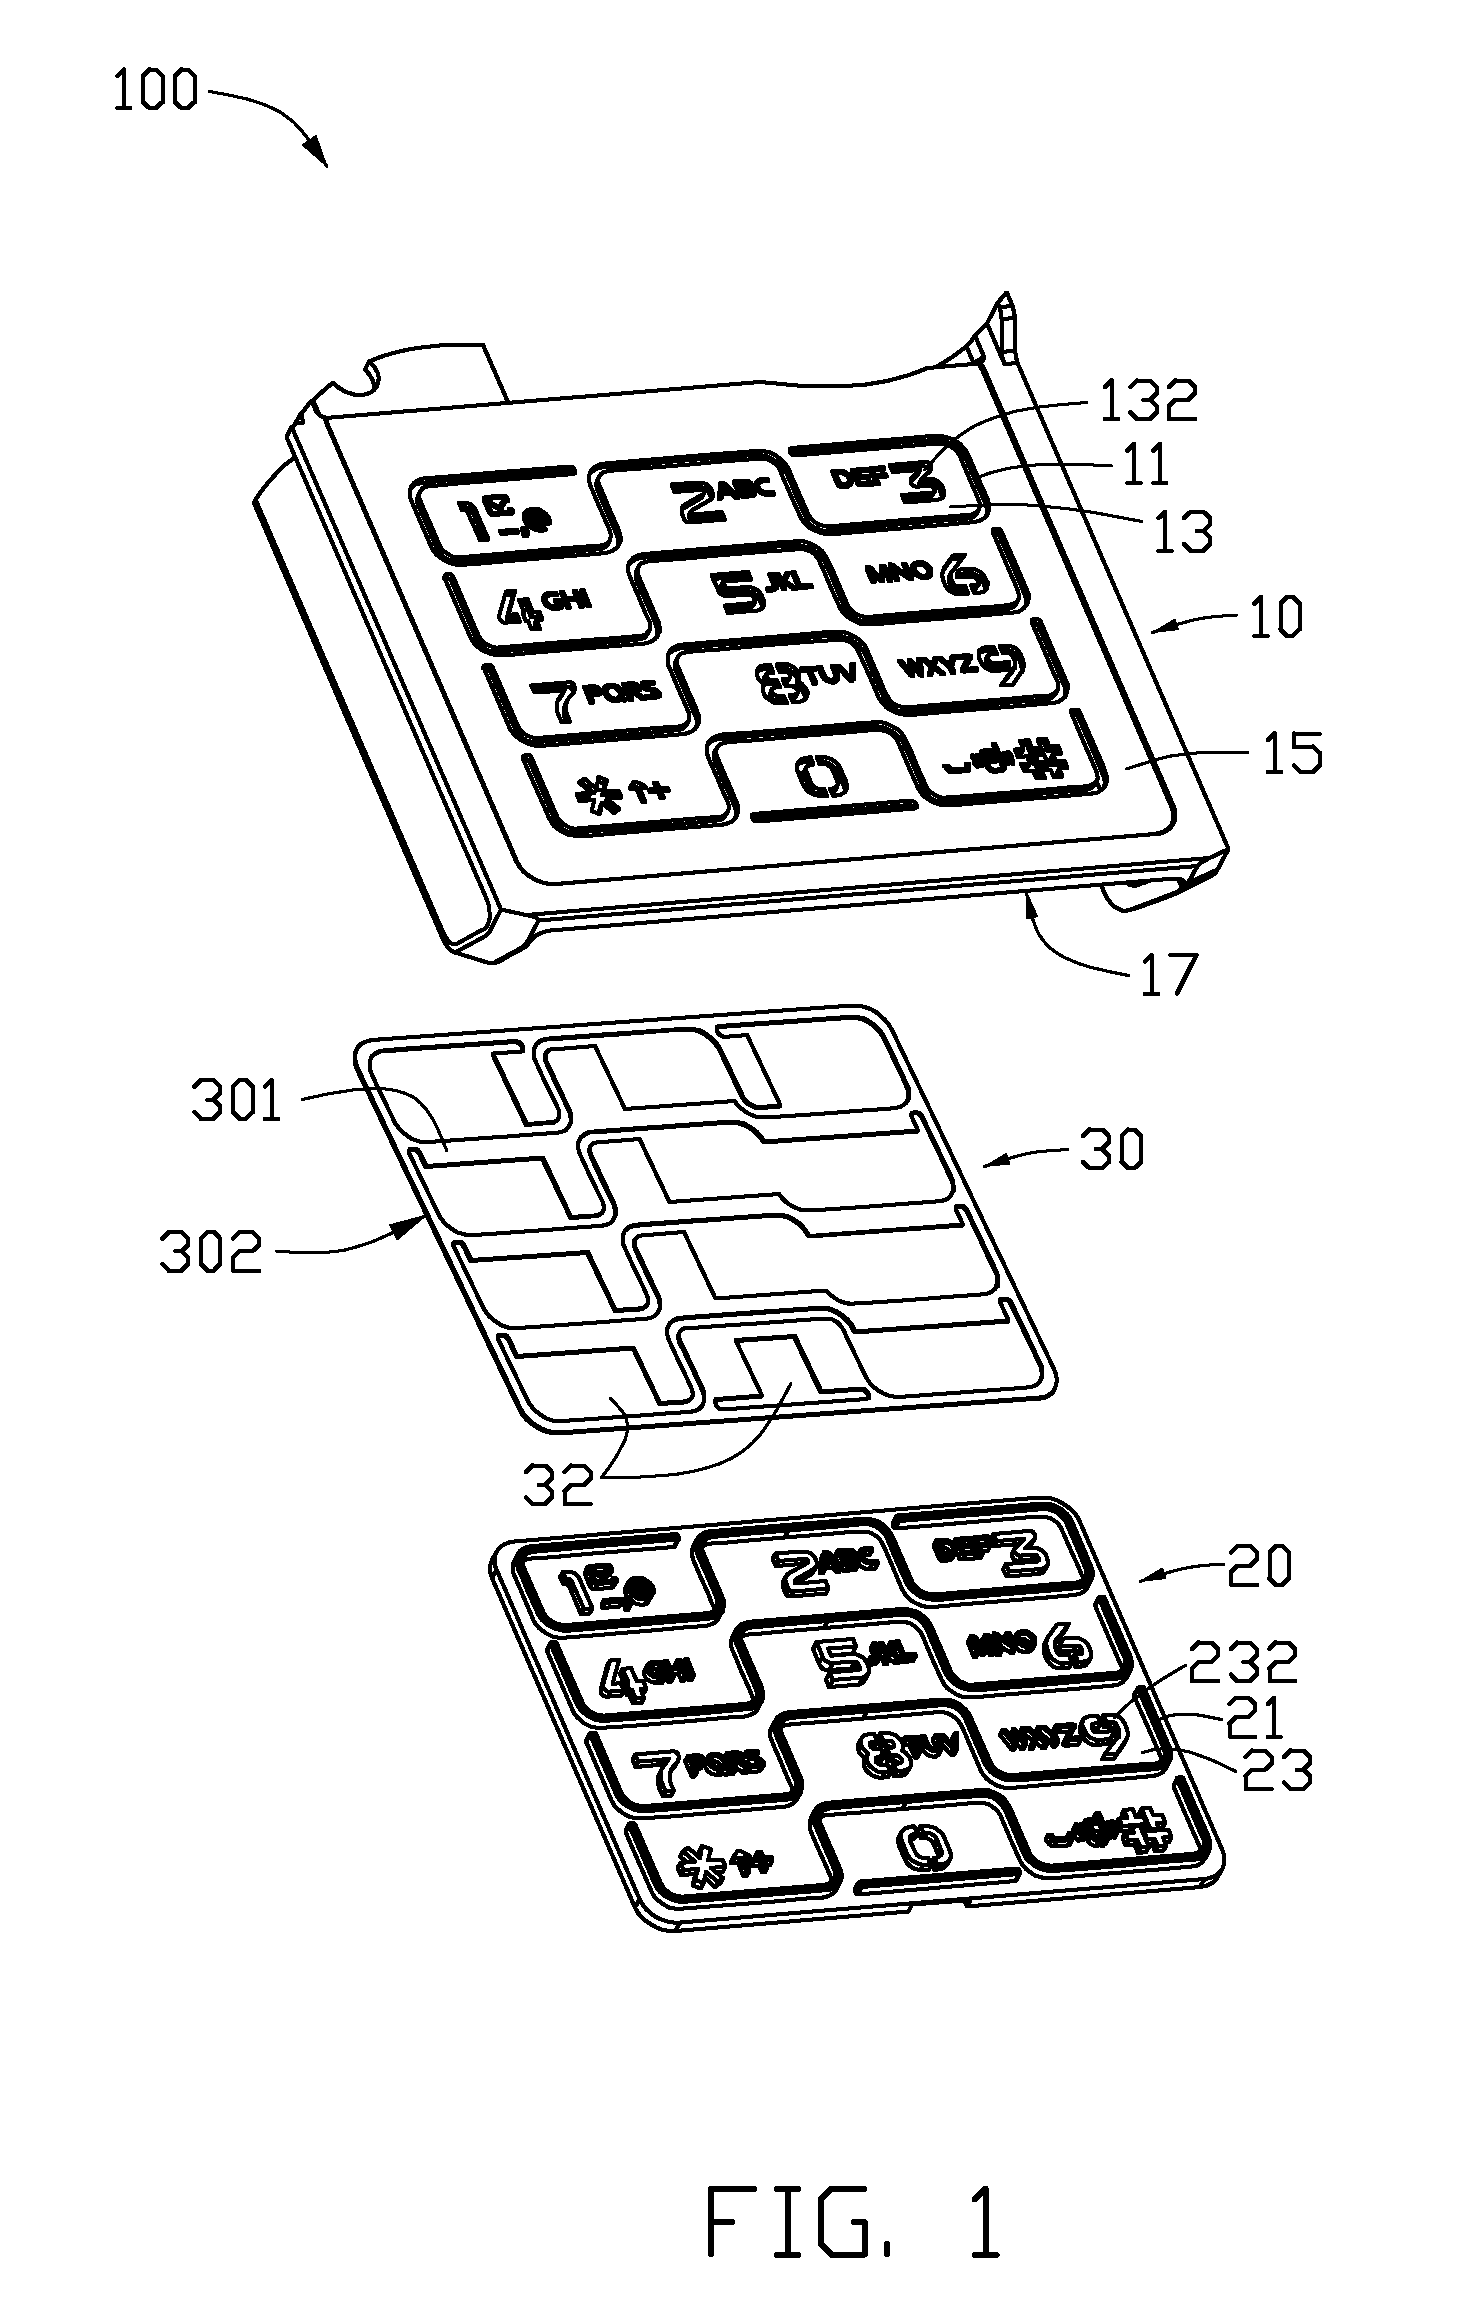 Keypad assembly and mathod for making the same